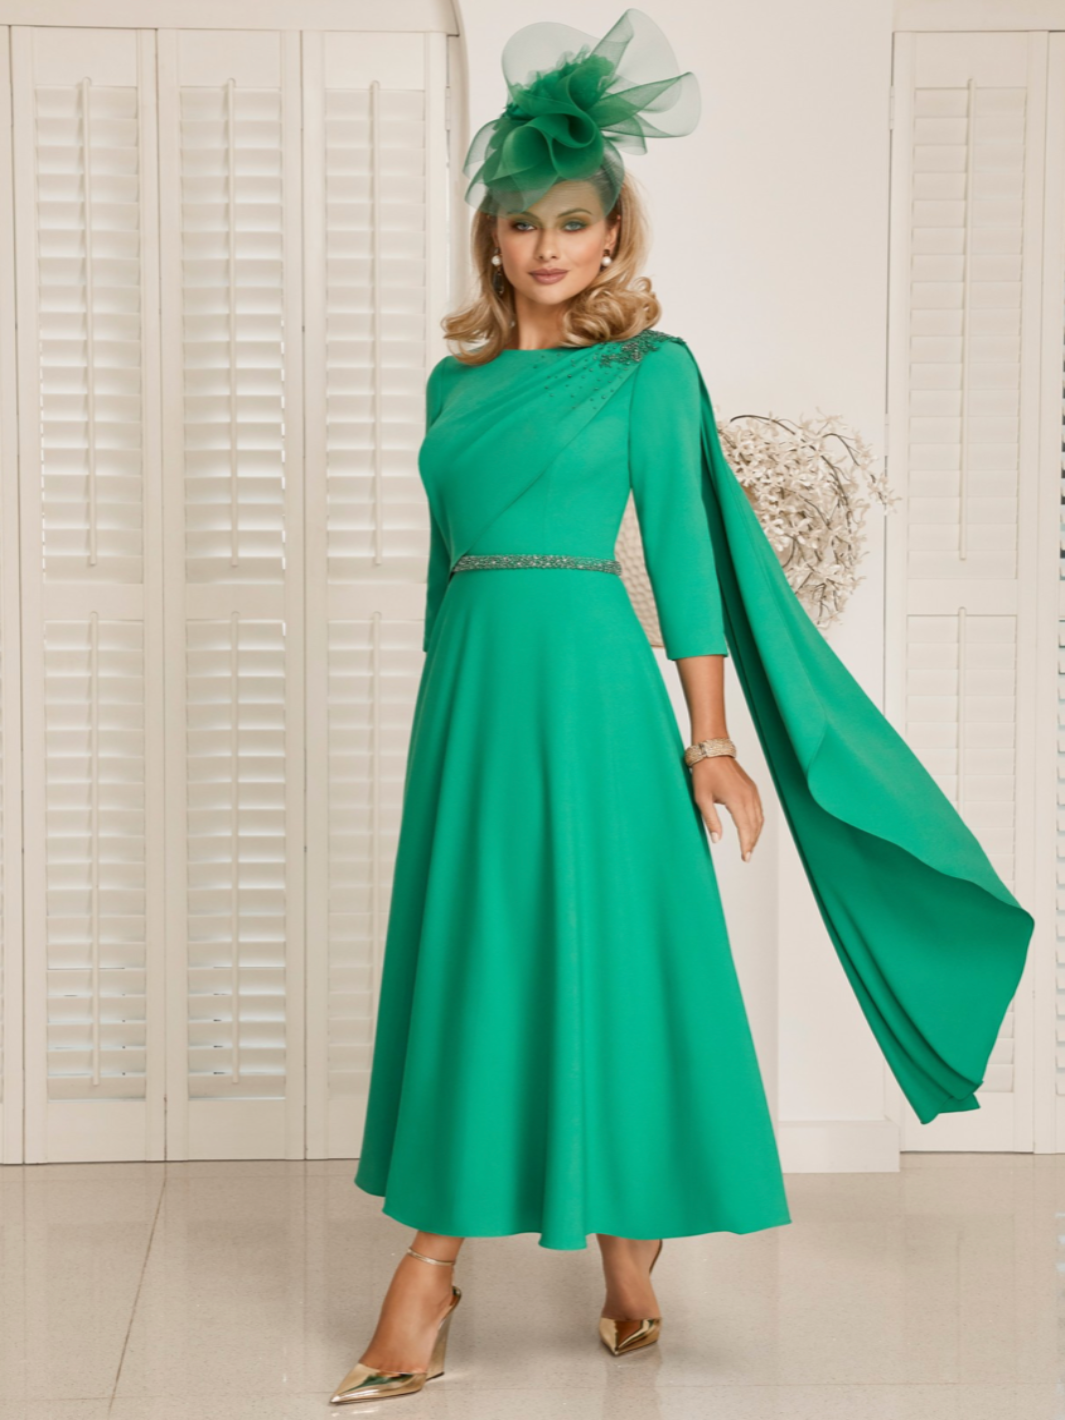 Veni Infantino 29880B- Shamrock Green-Mother of the bride- mother of the groom -Nicola Ross